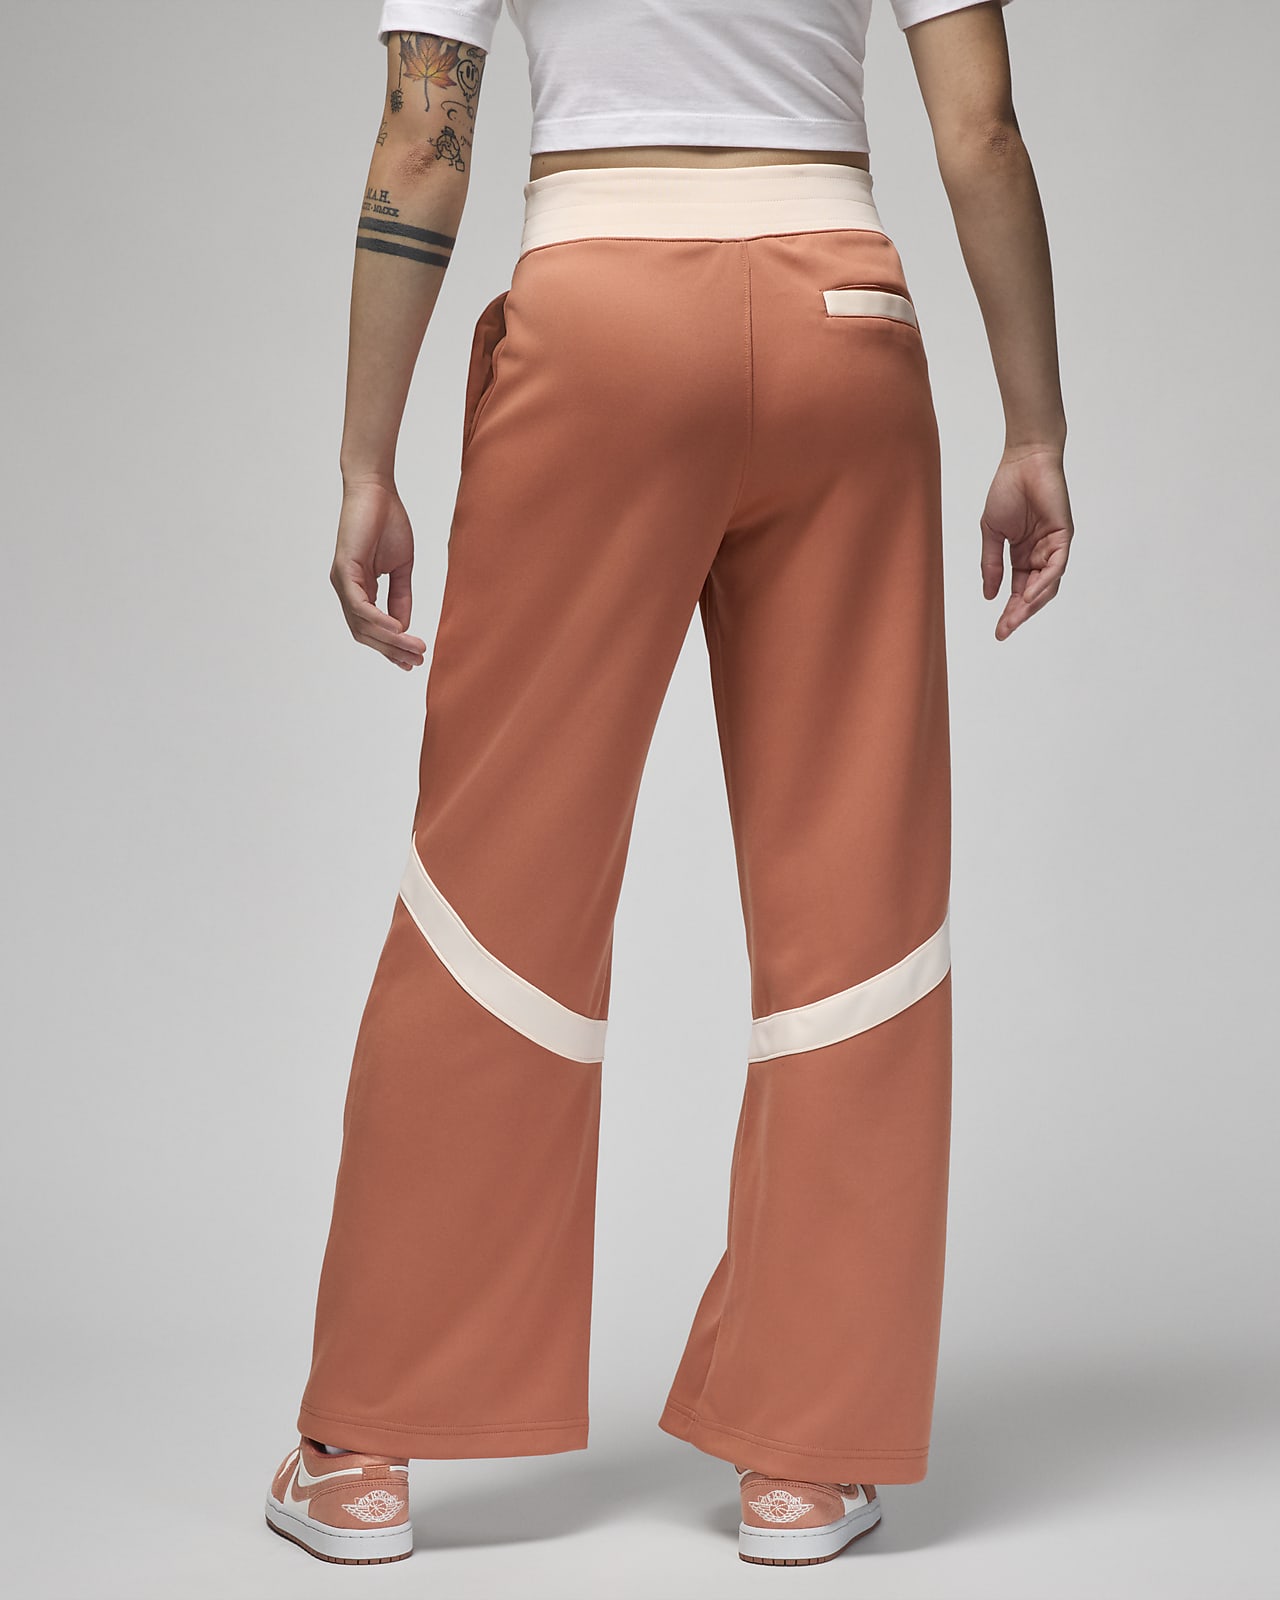 Nike Formal Trouser  Get Best Price from Manufacturers  Suppliers in India